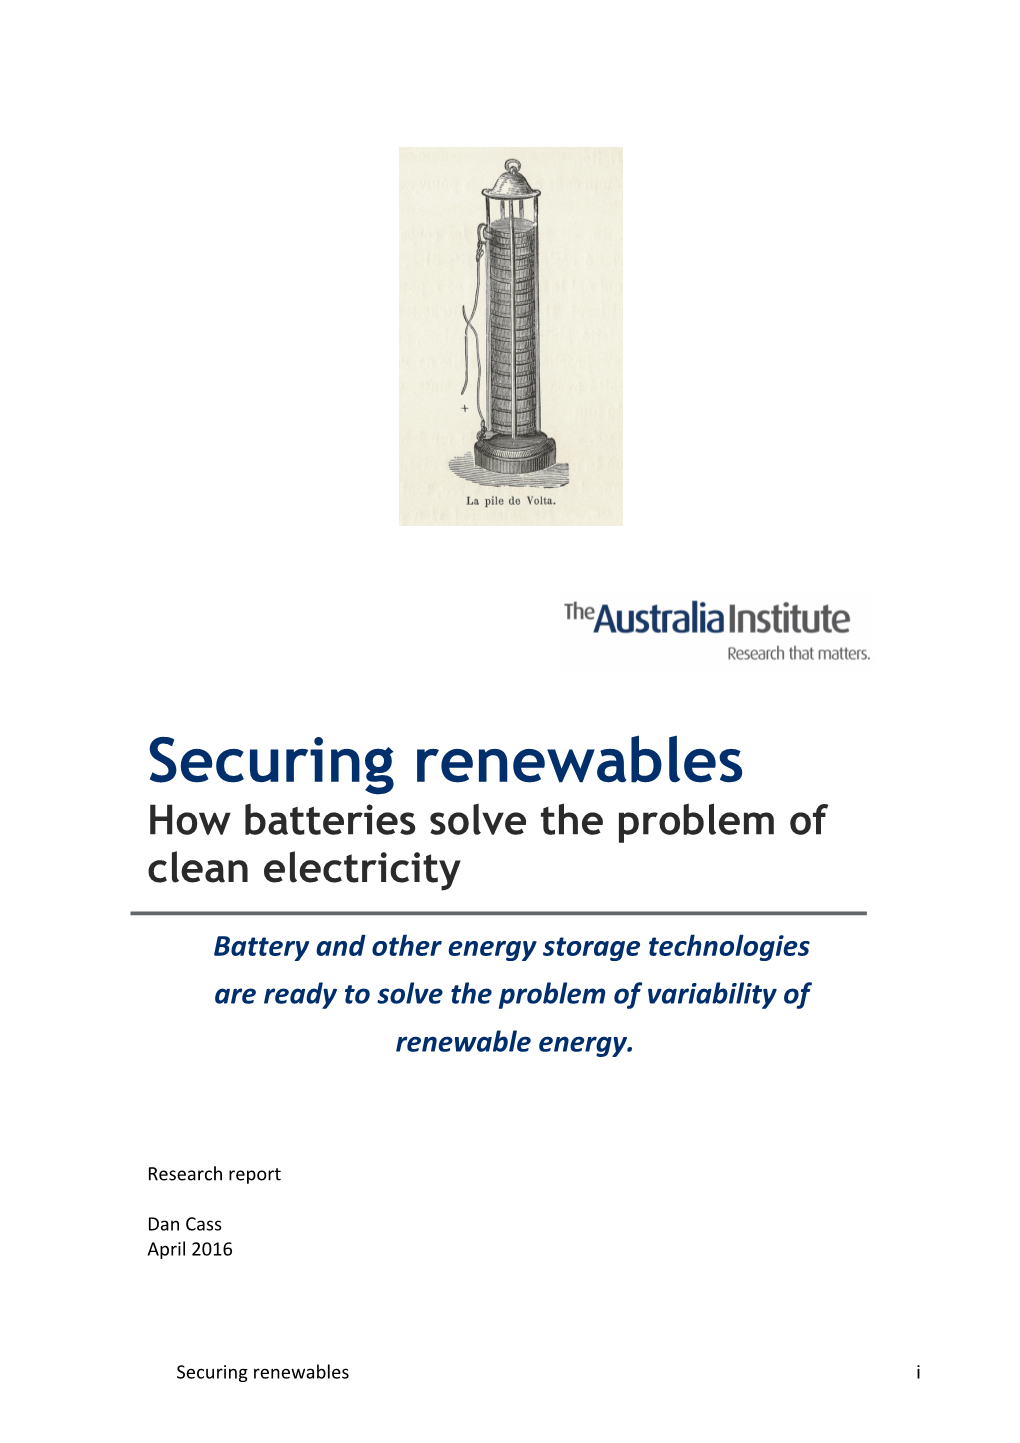 Securing Renewables How Batteries Solve the Problem of Clean Electricity